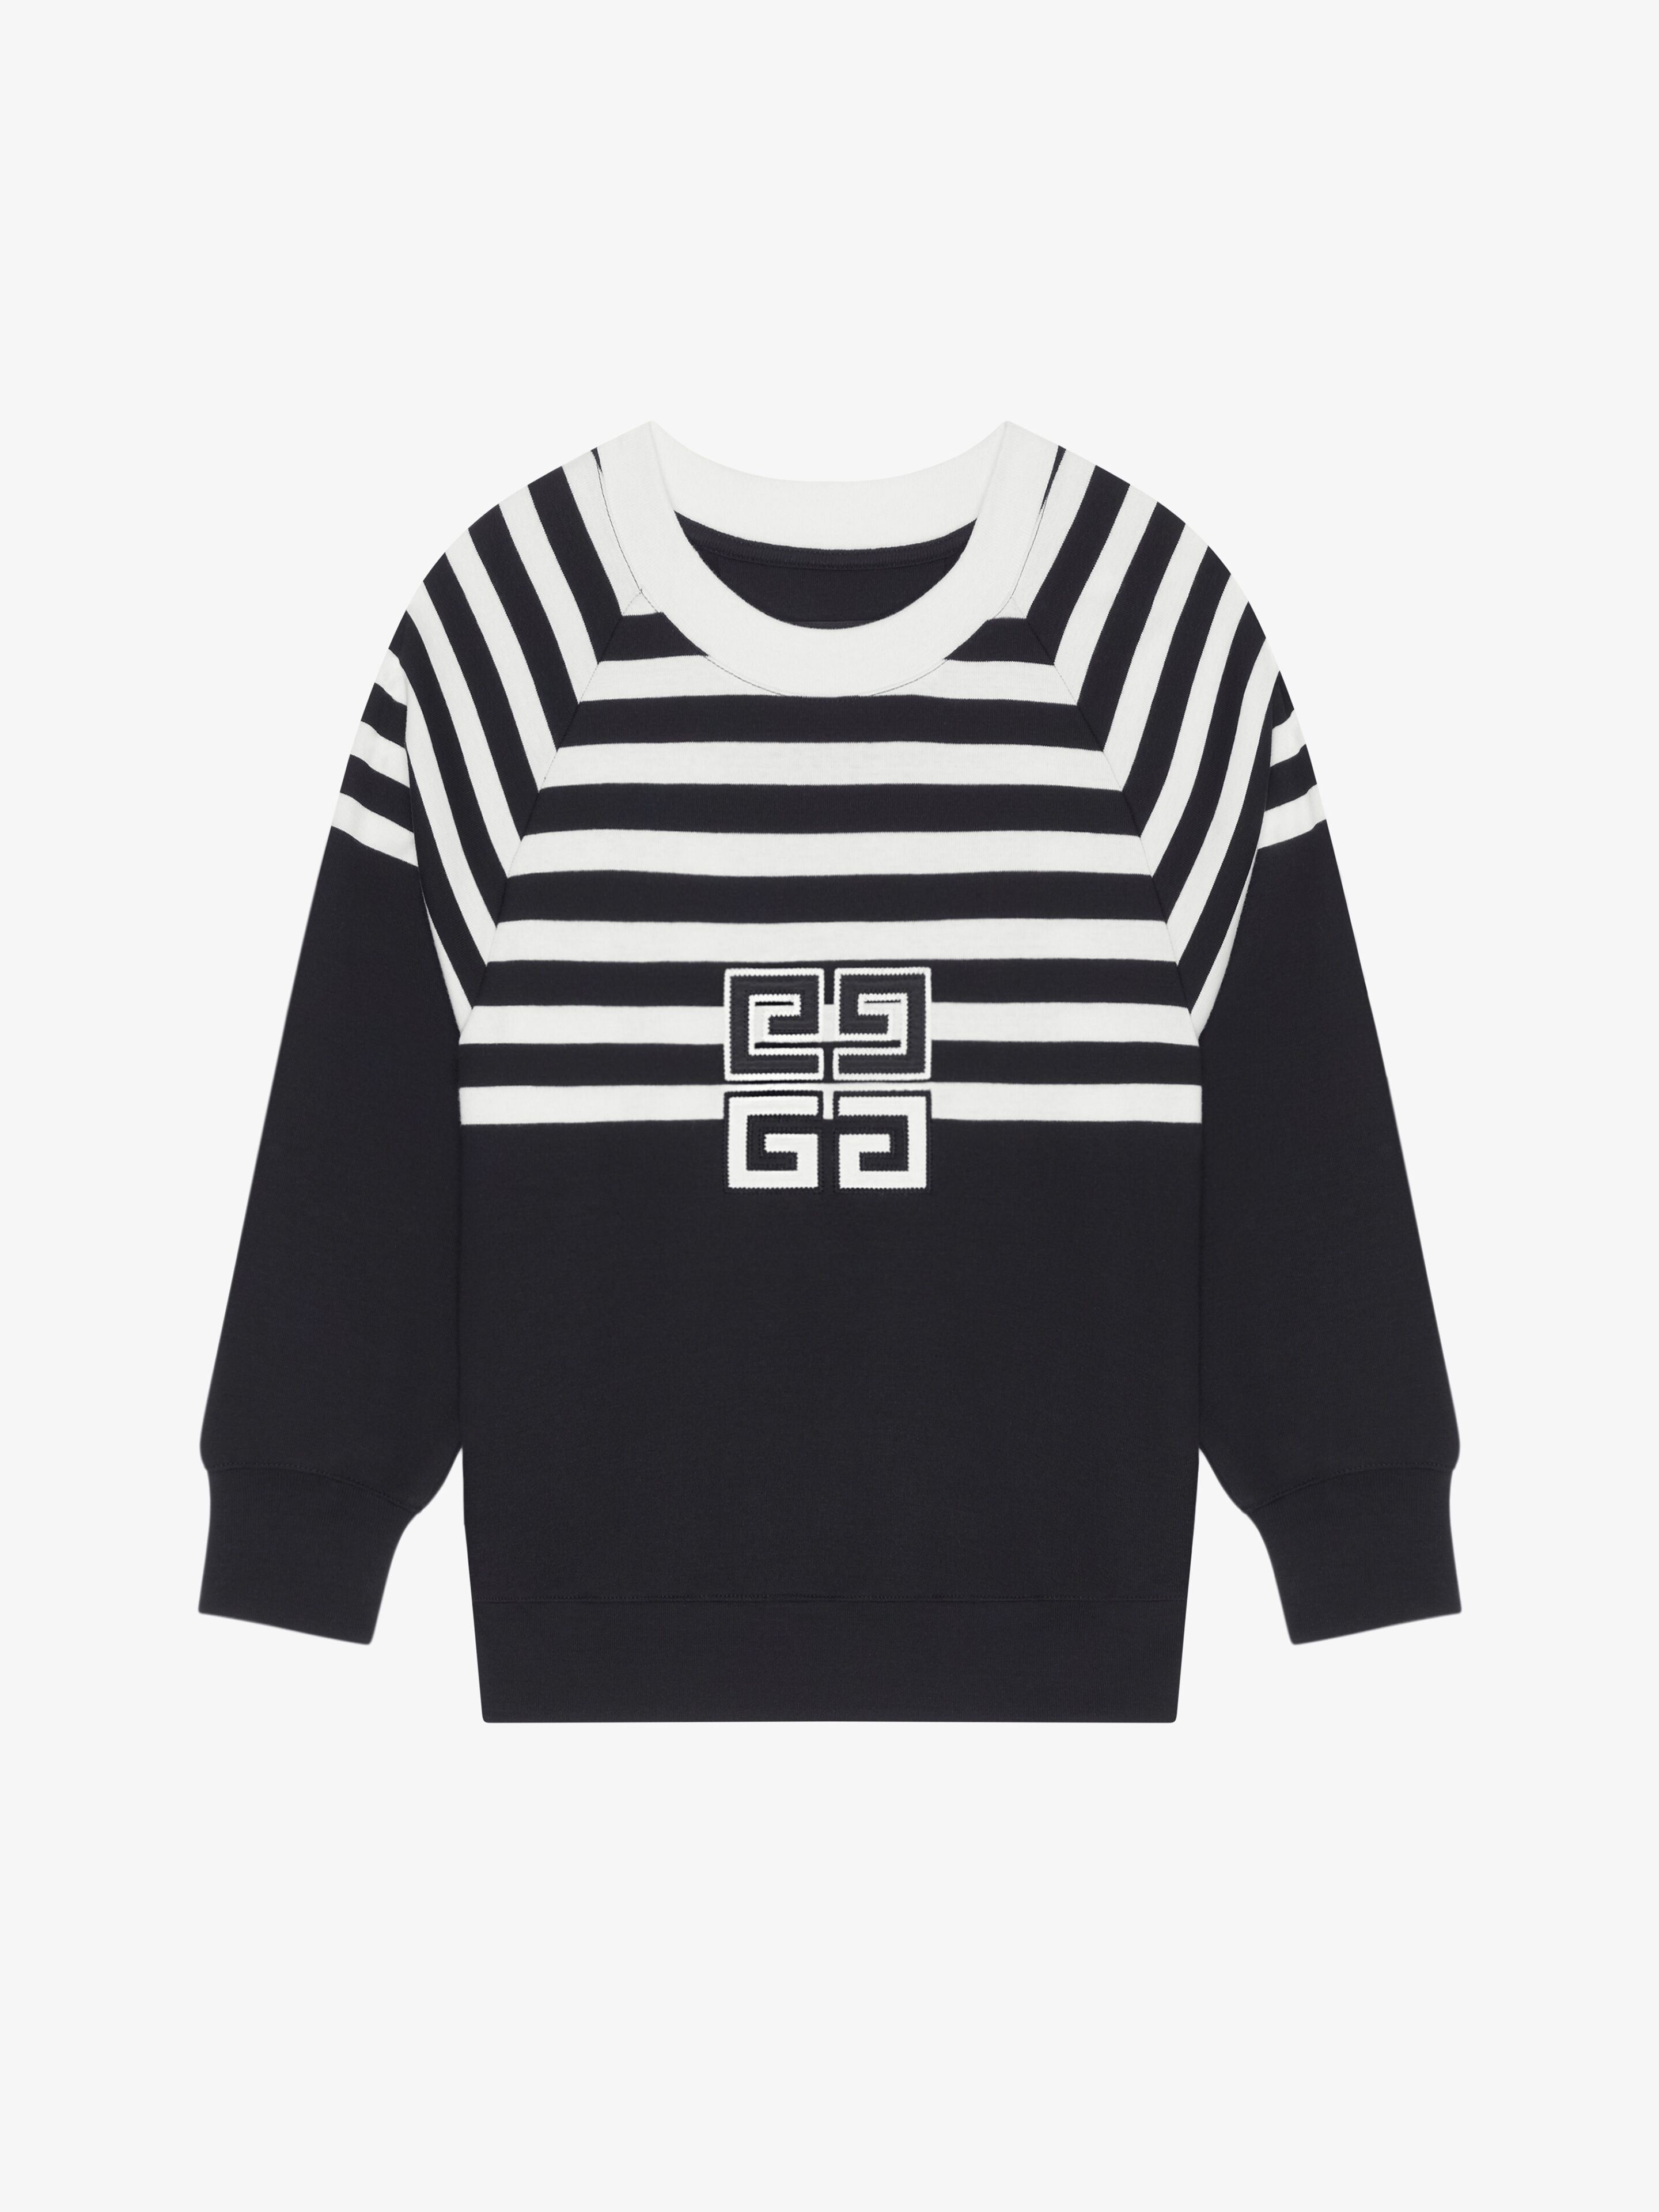 Givenchy Women's 4g Sweatshirt In Jersey With Stripes In Black/white